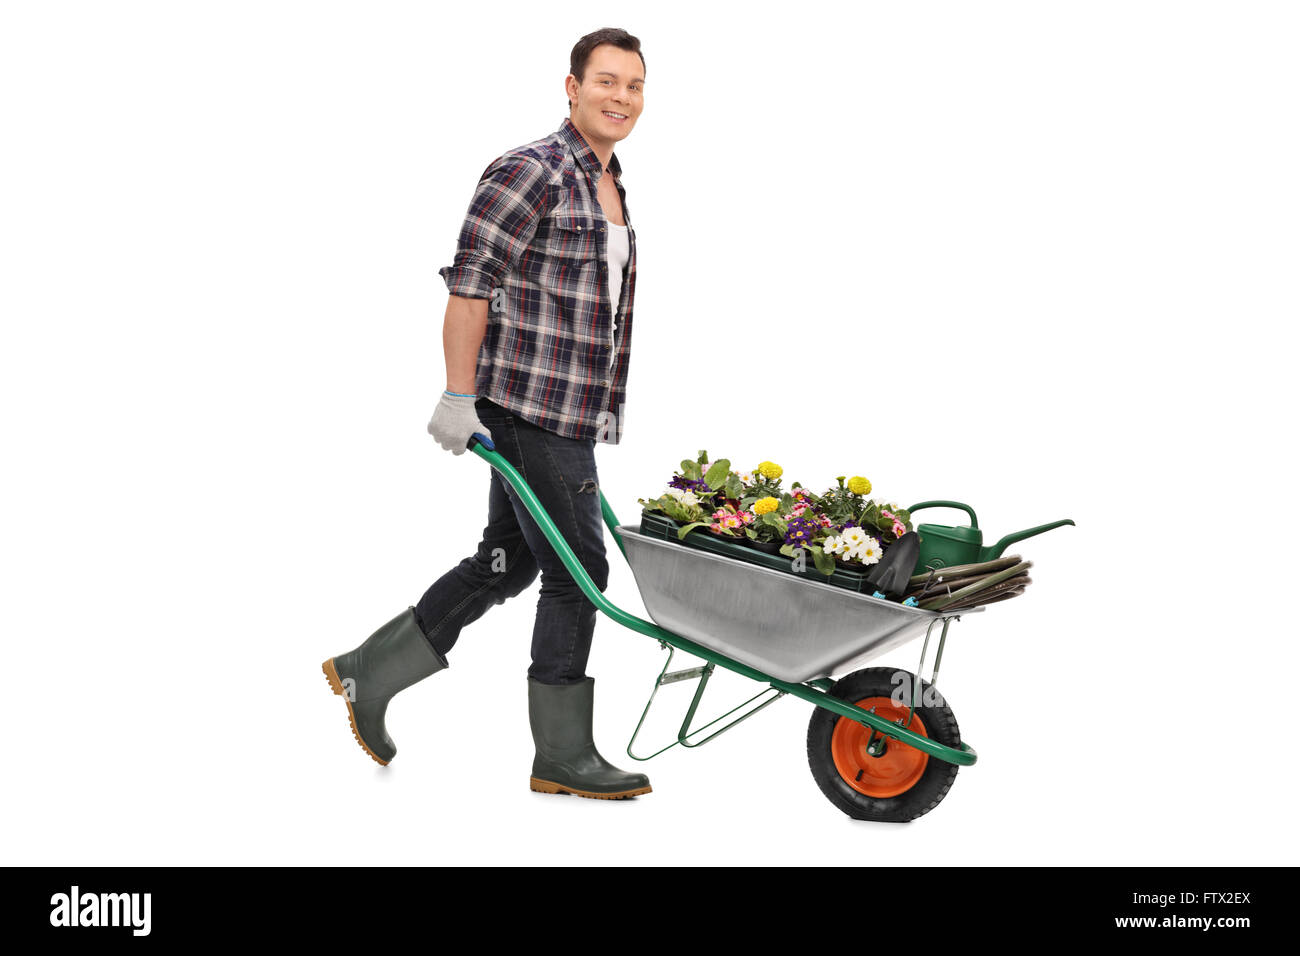 Young gardener pushing a wheelbarrow full of gardening equipment and flowers isolated on white background Stock Photo